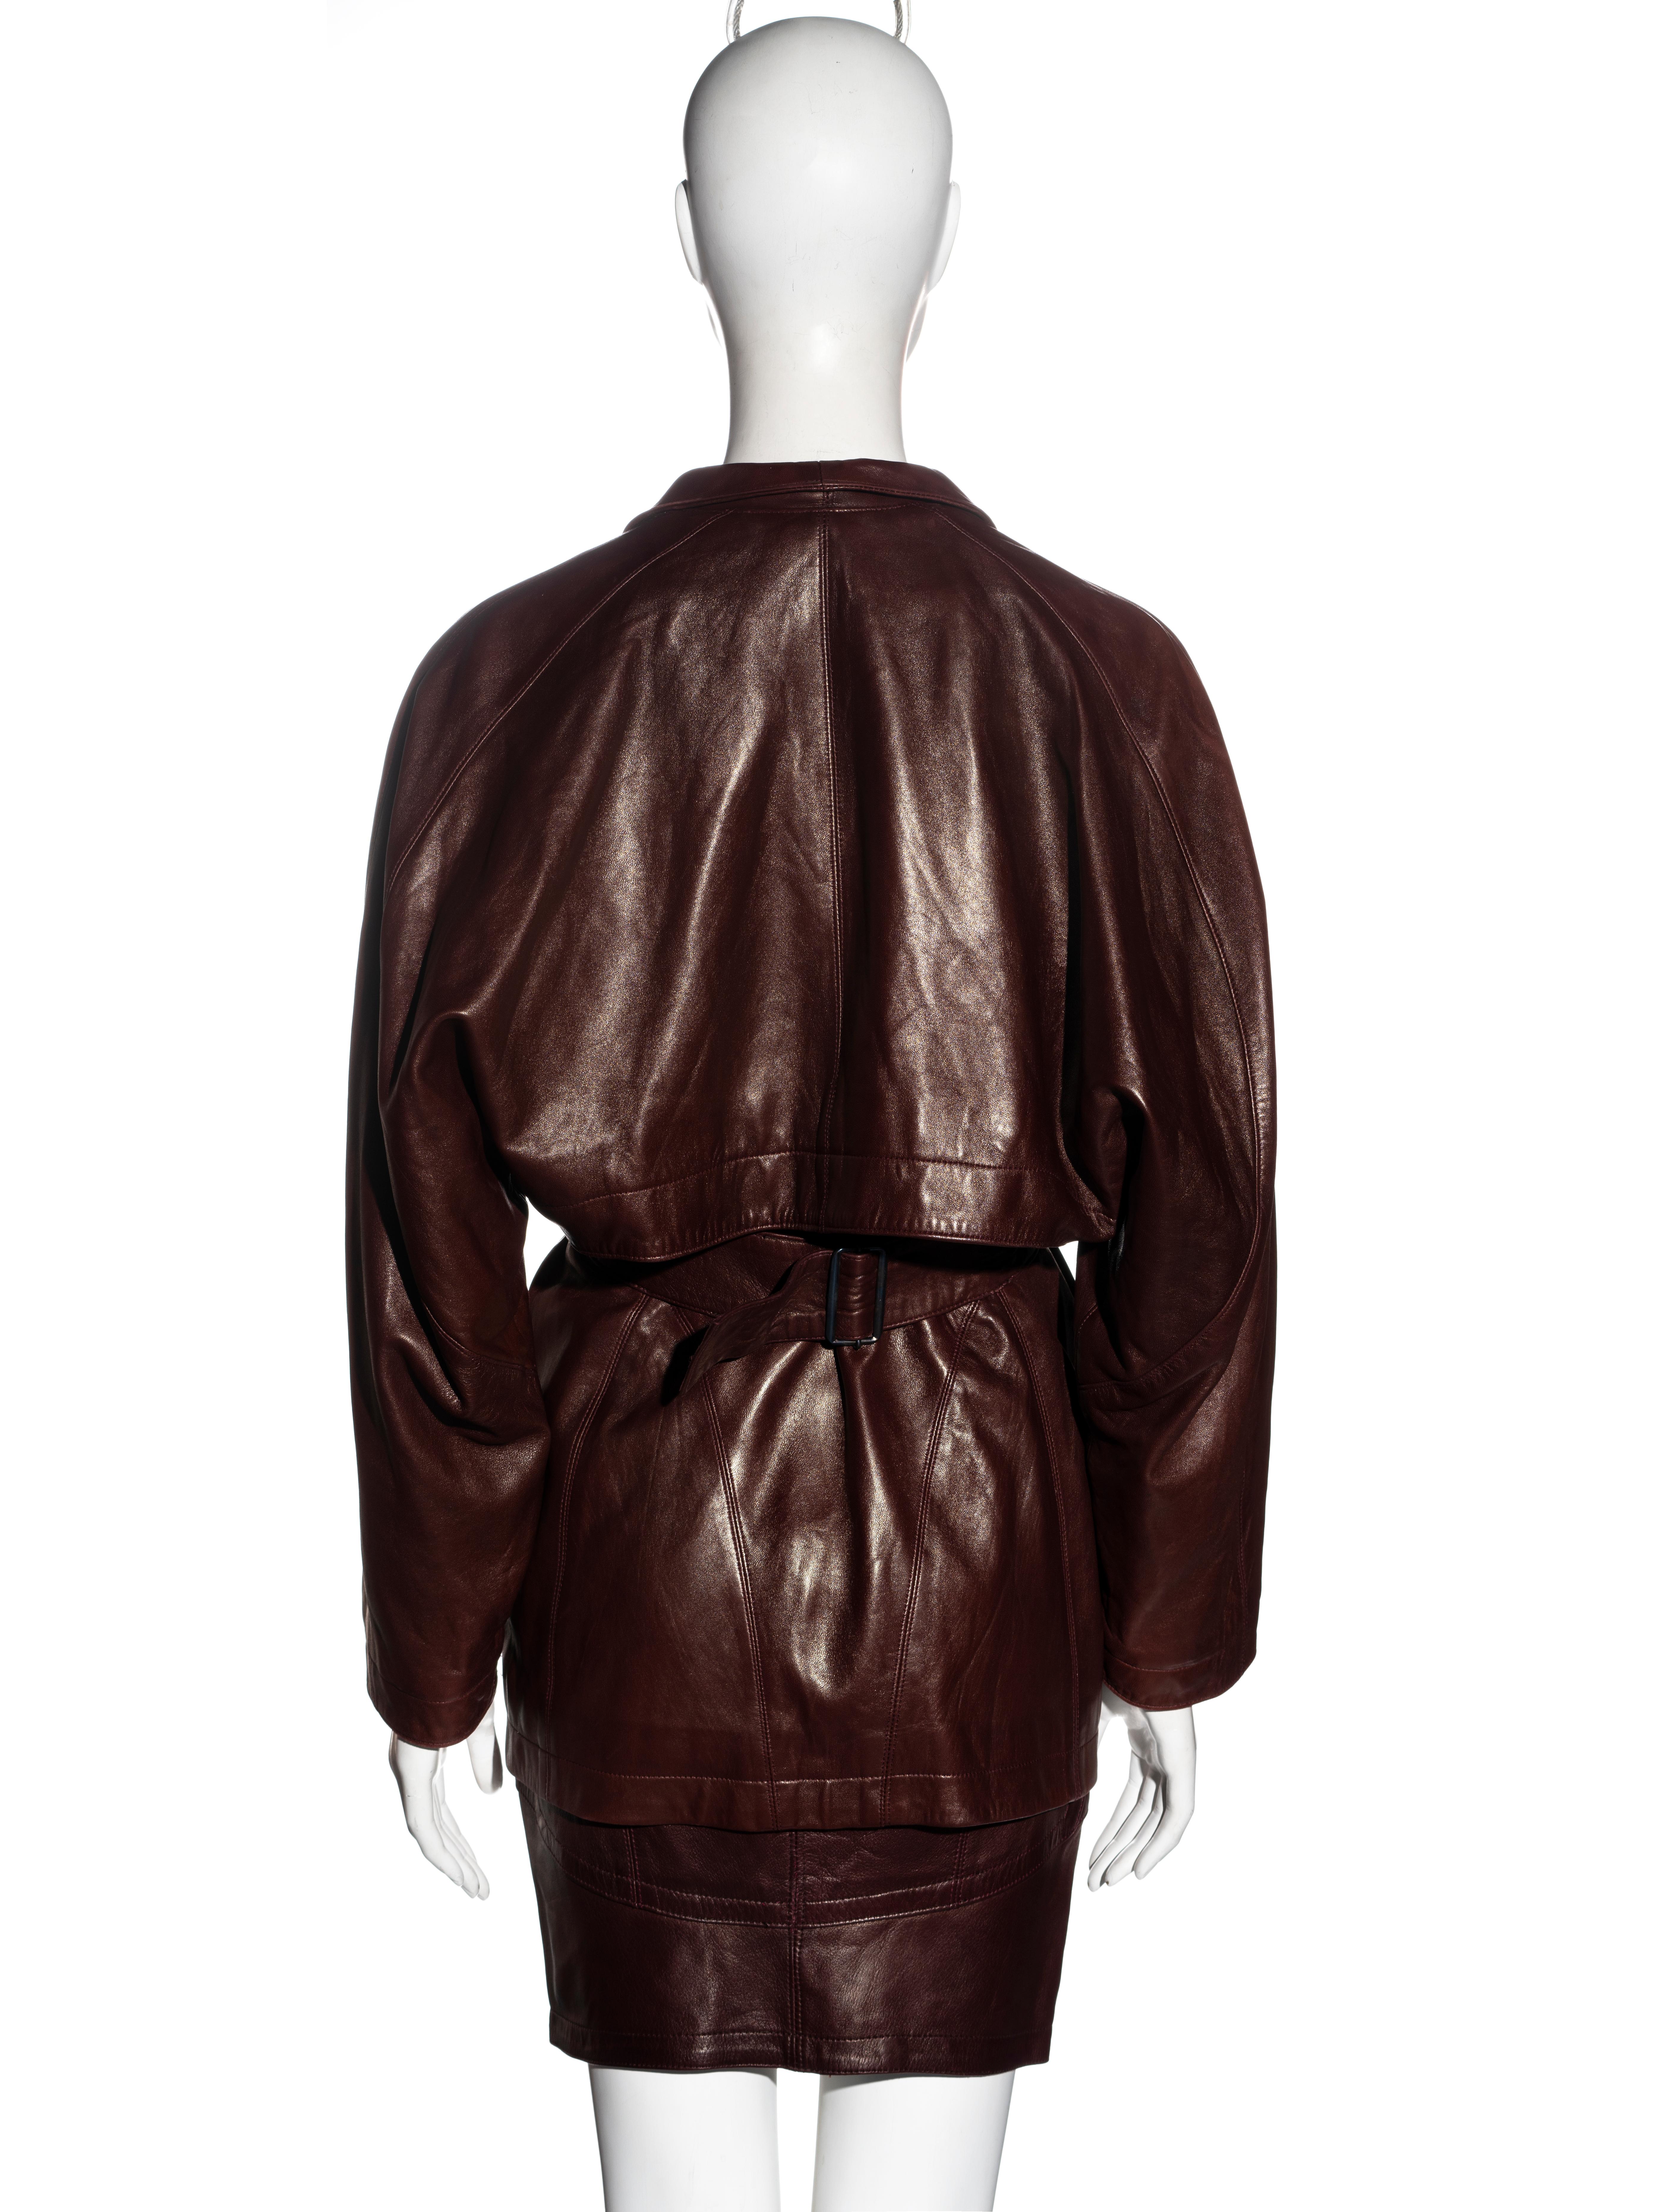 Azzedine Alaia brown leather jacket and skirt suit, fw 1984 2